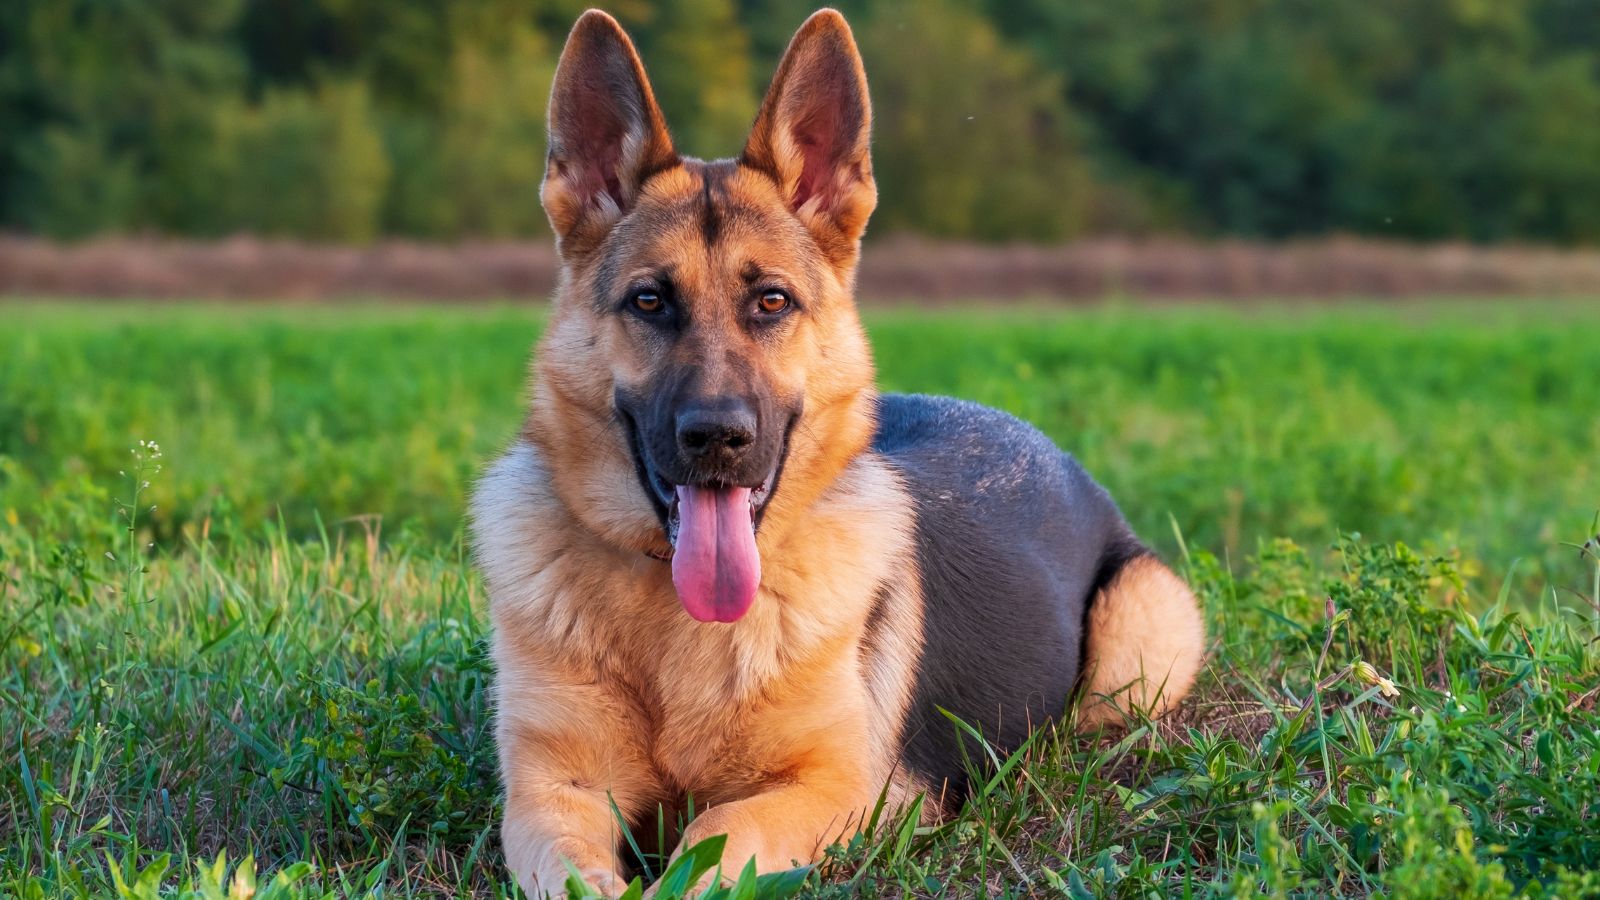 <p><span>These large, black-and-tan dogs are highly intelligent and often used in police or military roles, but they’re also very loyal and form close bonds with their owners and other family members, says </span><a href="https://www.hoomansfriend.com/post/german-shepherd-temperament-fierce-protector-and-loyal-friend#:~:text=Finally%2C%20this%20breed's%20intelligence%20and,becoming%20fiercely%20loyal%20to%20them."><span>Hooman’s Friend</span></a><span>. Their fierce loyalty also makes them great at protecting homes and children, and they often show great courage and commitment when doing so.</span></p>